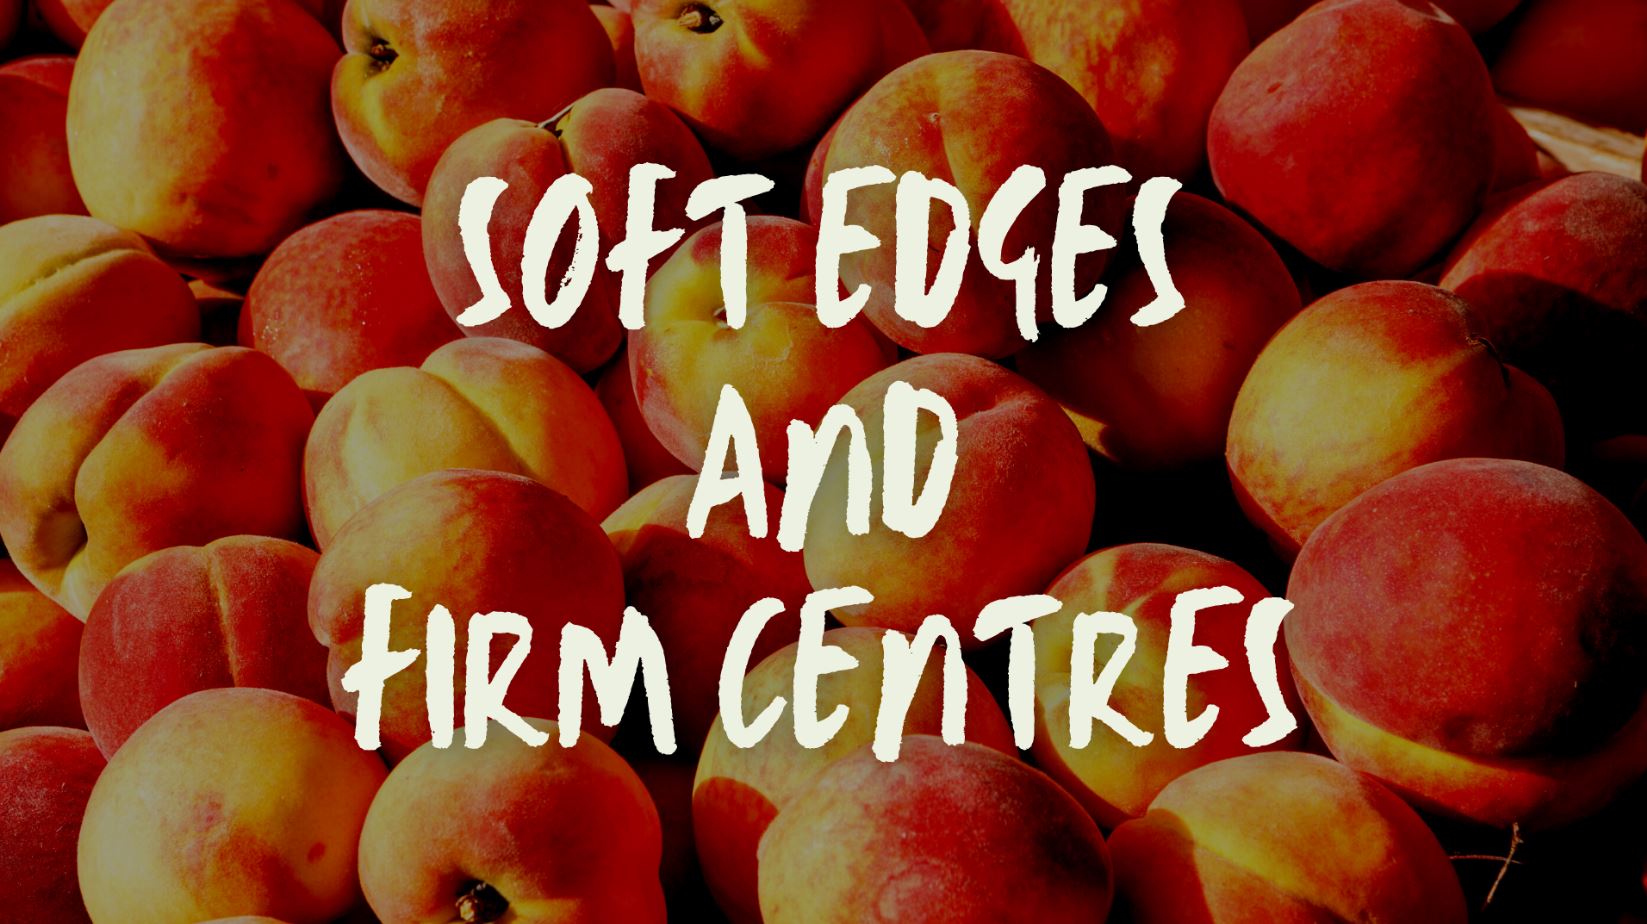 Soft Edges and Firm Centres